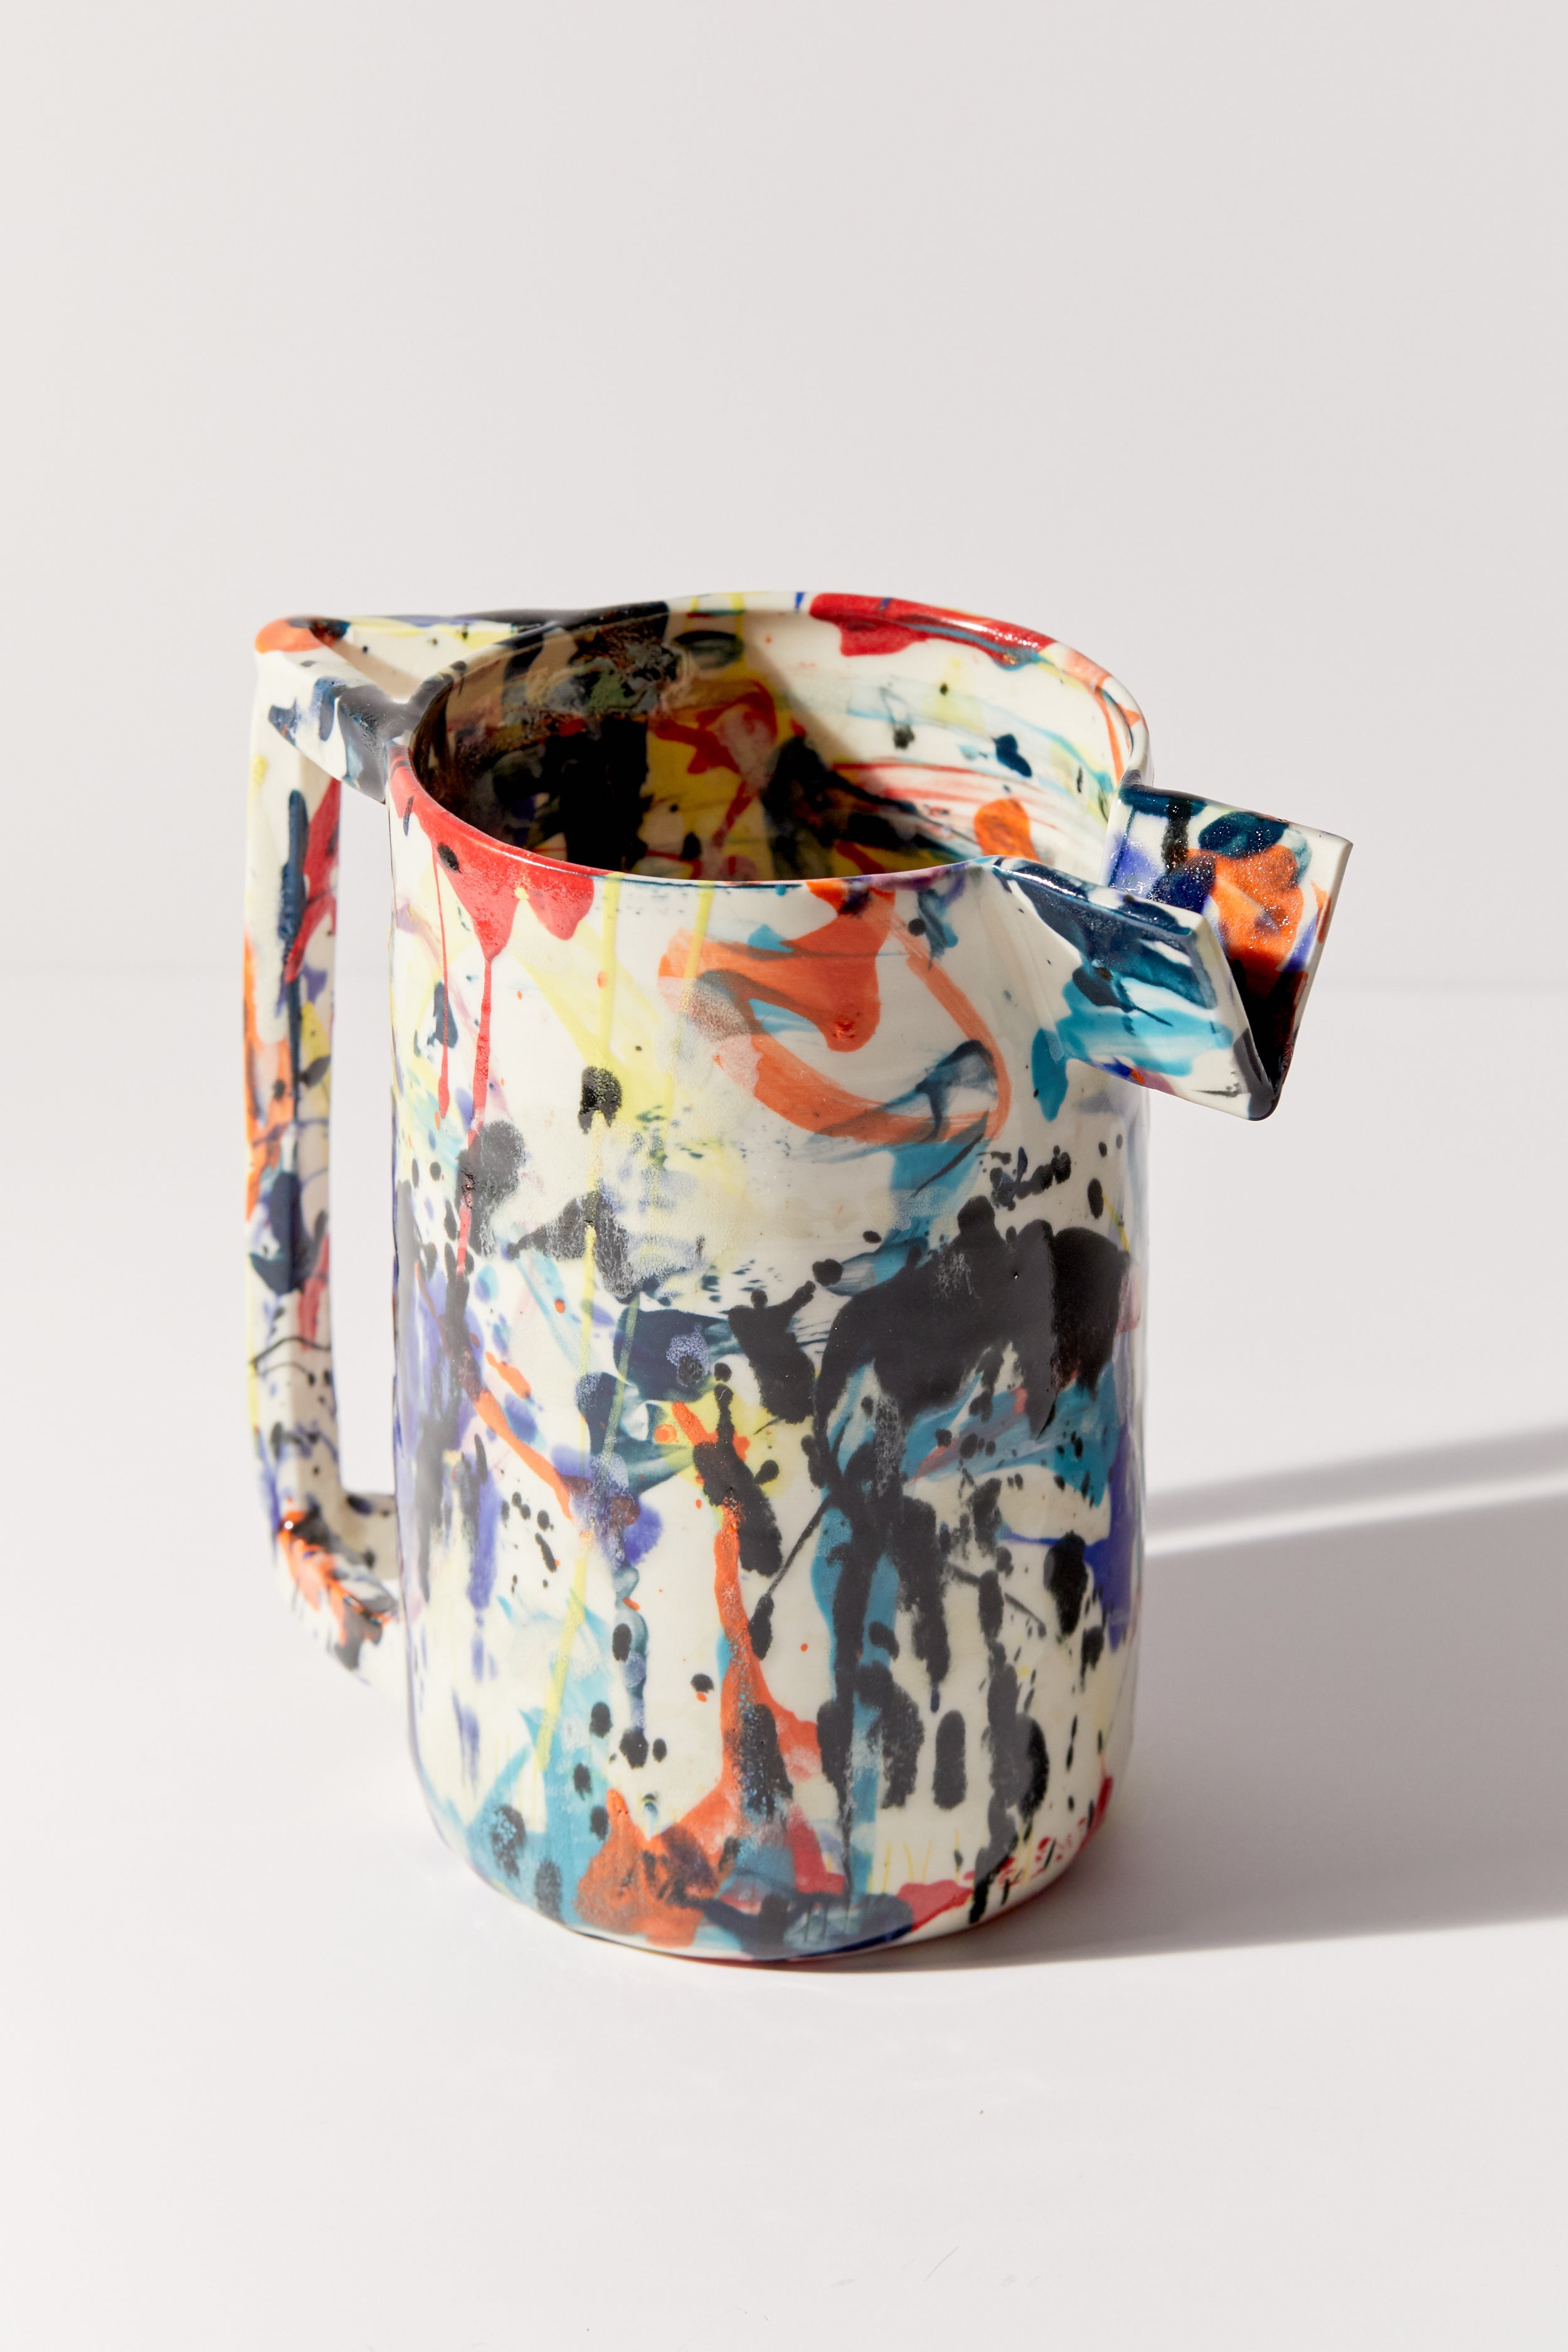 These Urban Outfitters Vases Sold Out in 2 Days Last YearâNow Theyâre Back